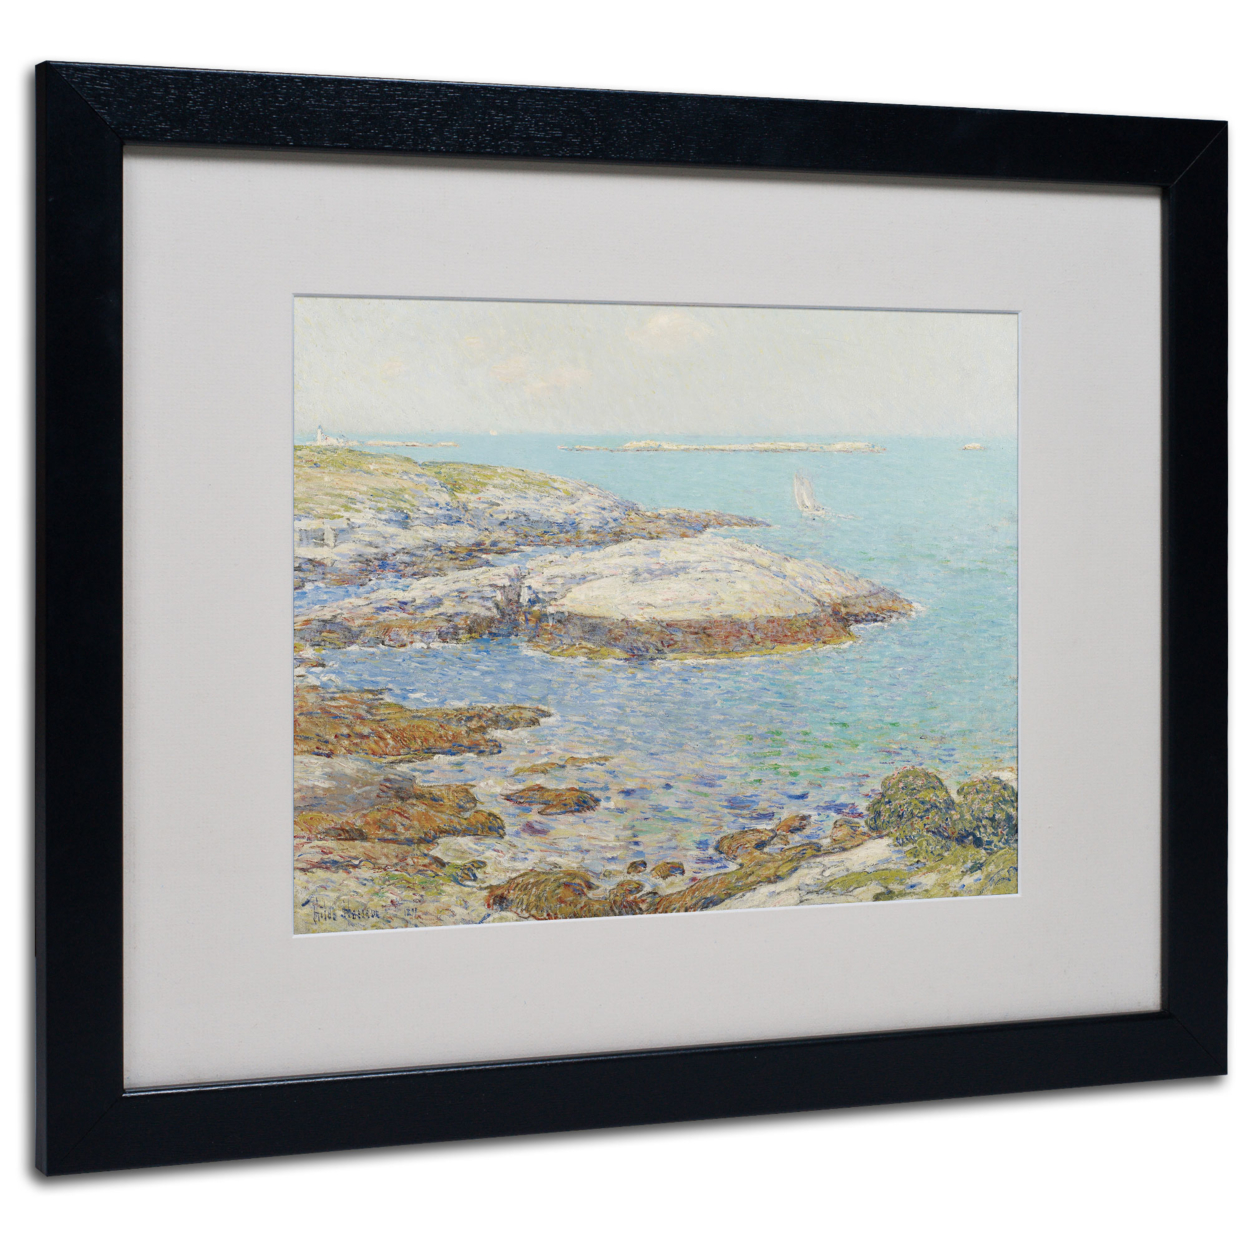 Childe Hassam 'Isles Of Shoals 1899' Black Wooden Framed Art 18 X 22 Inches